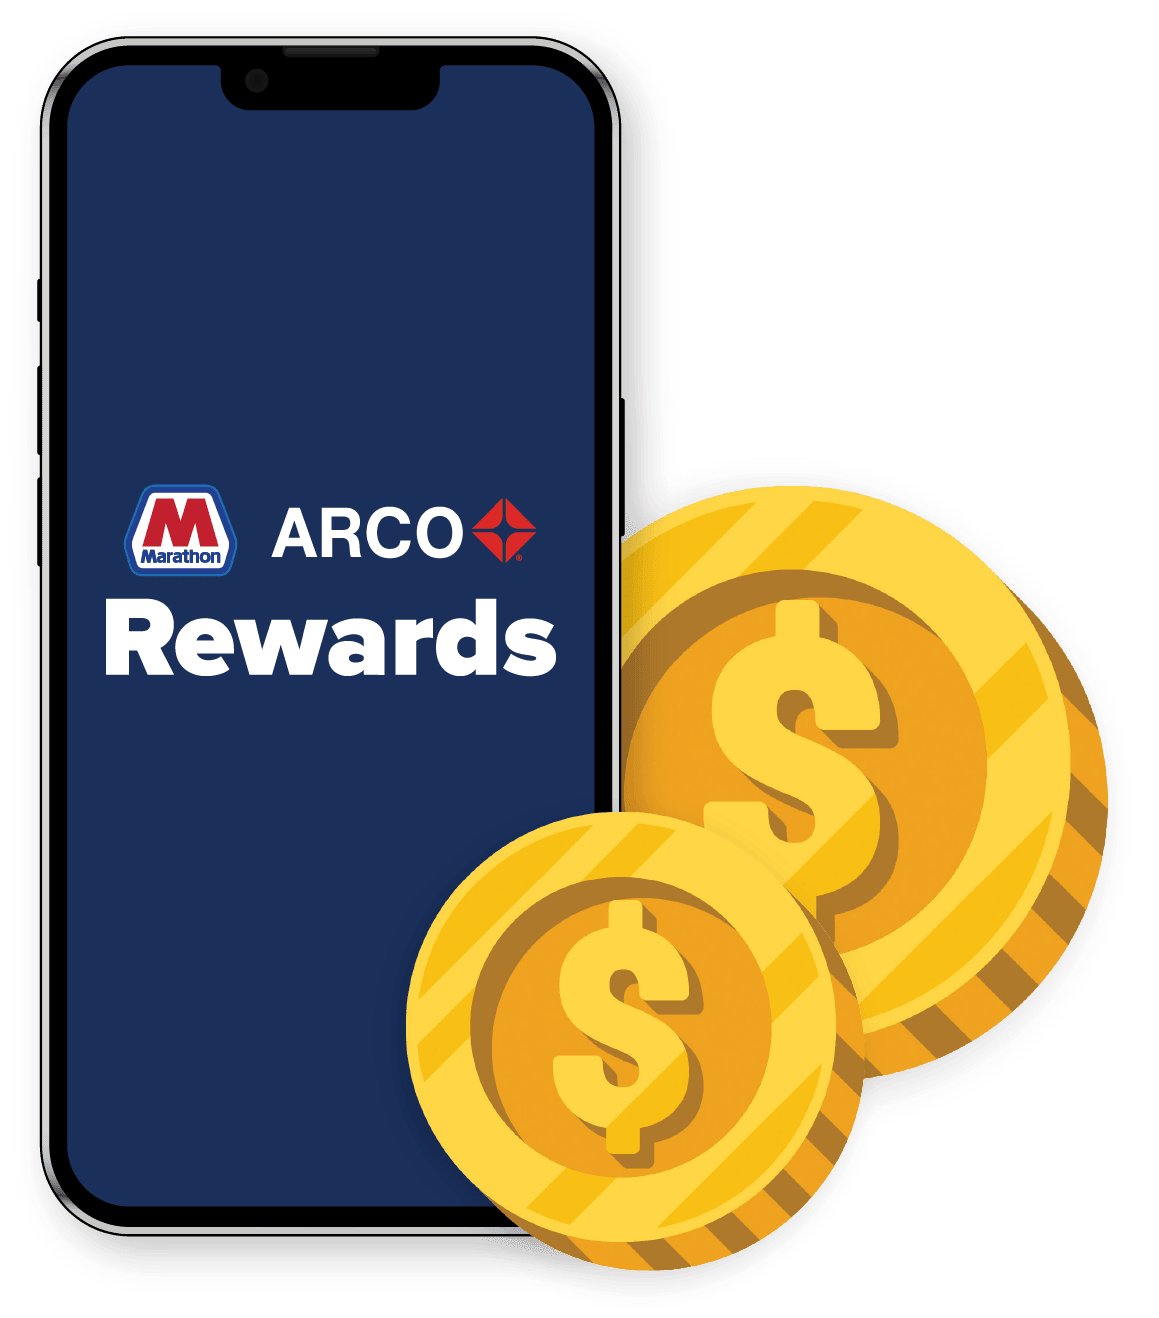 mobile phone showing Marathon ARCO Rewards logo, with coins next to the phone